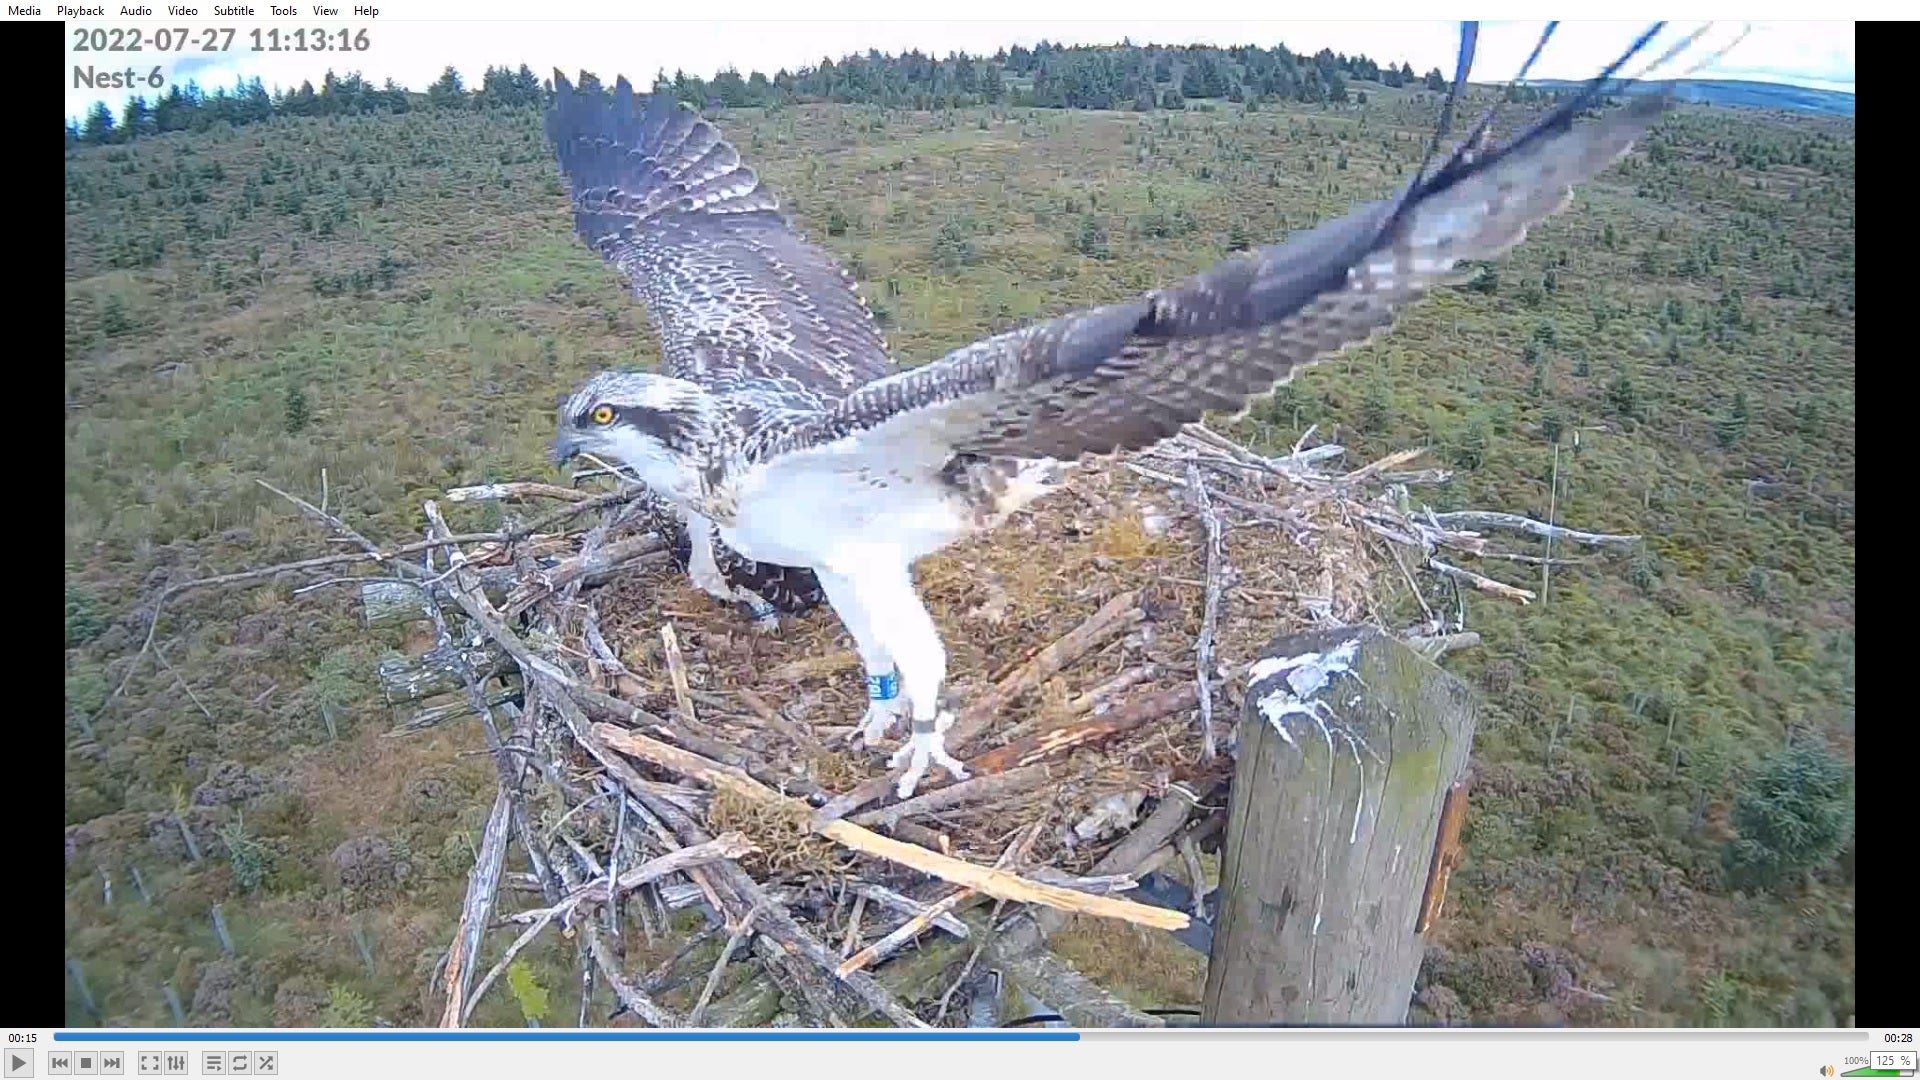 Fourlaws the osprey makes her first flight over Kielder Forest, Northumberland (Forestry England/PA)